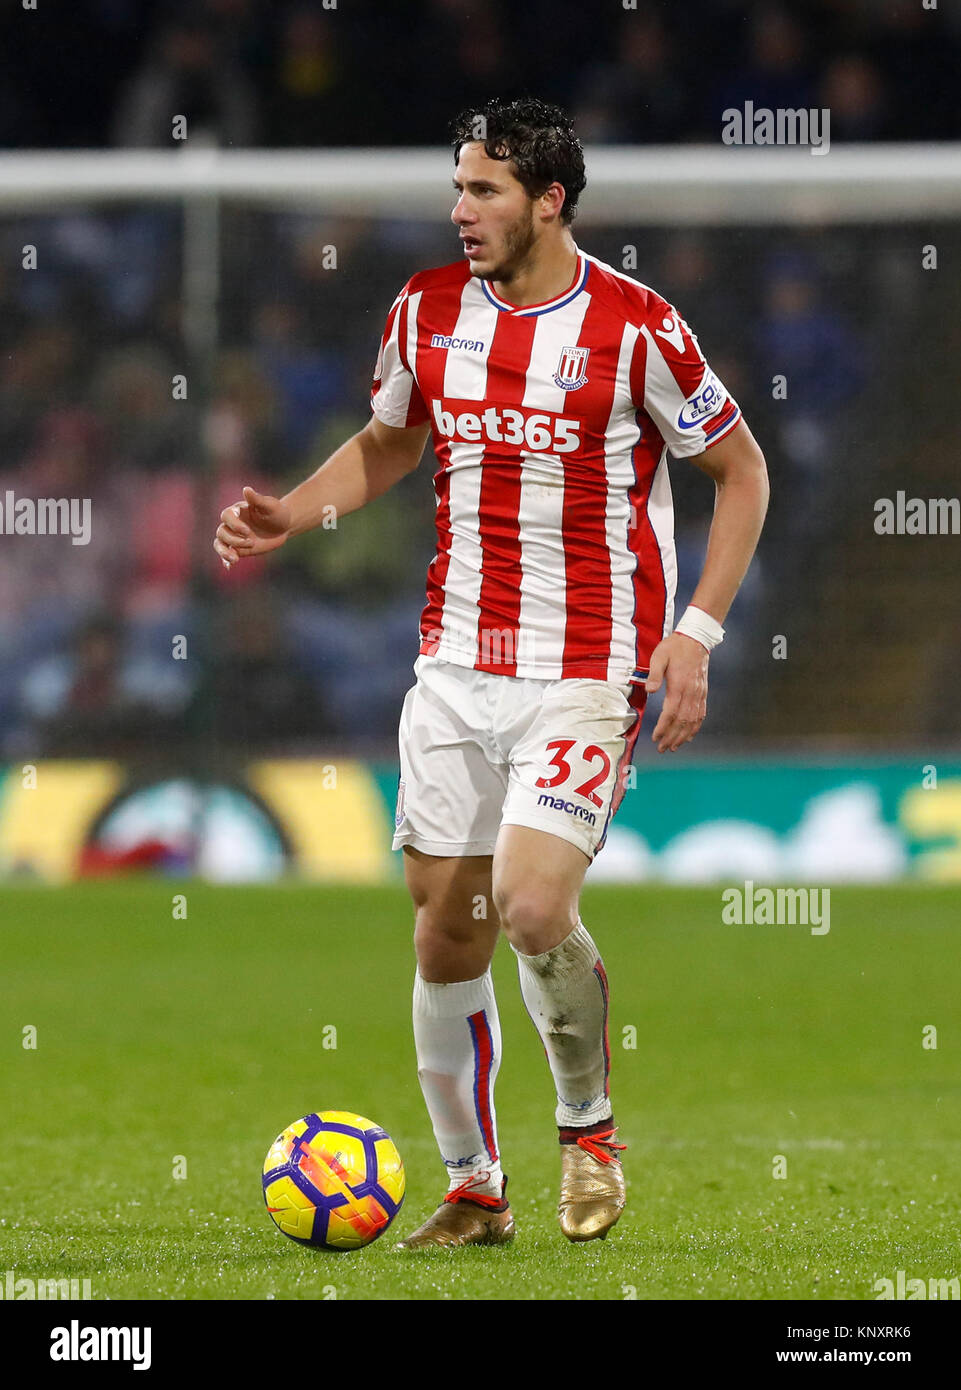 Stoke City's Ramadan Sobhi during the Premier League match at Turf Moor, Burnley. PRESS ASSOCIATION Photo. Picture date: Tuesday December 12, 2017. See PA story SOCCER Burnley. Photo credit should read: Martin Rickett/PA Wire. RESTRICTIONS: EDITORIAL USE ONLY No use with unauthorised audio, video, data, fixture lists, club/league logos or 'live' services. Online in-match use limited to 75 images, no video emulation. No use in betting, games or single club/league/player publications. Stock Photo